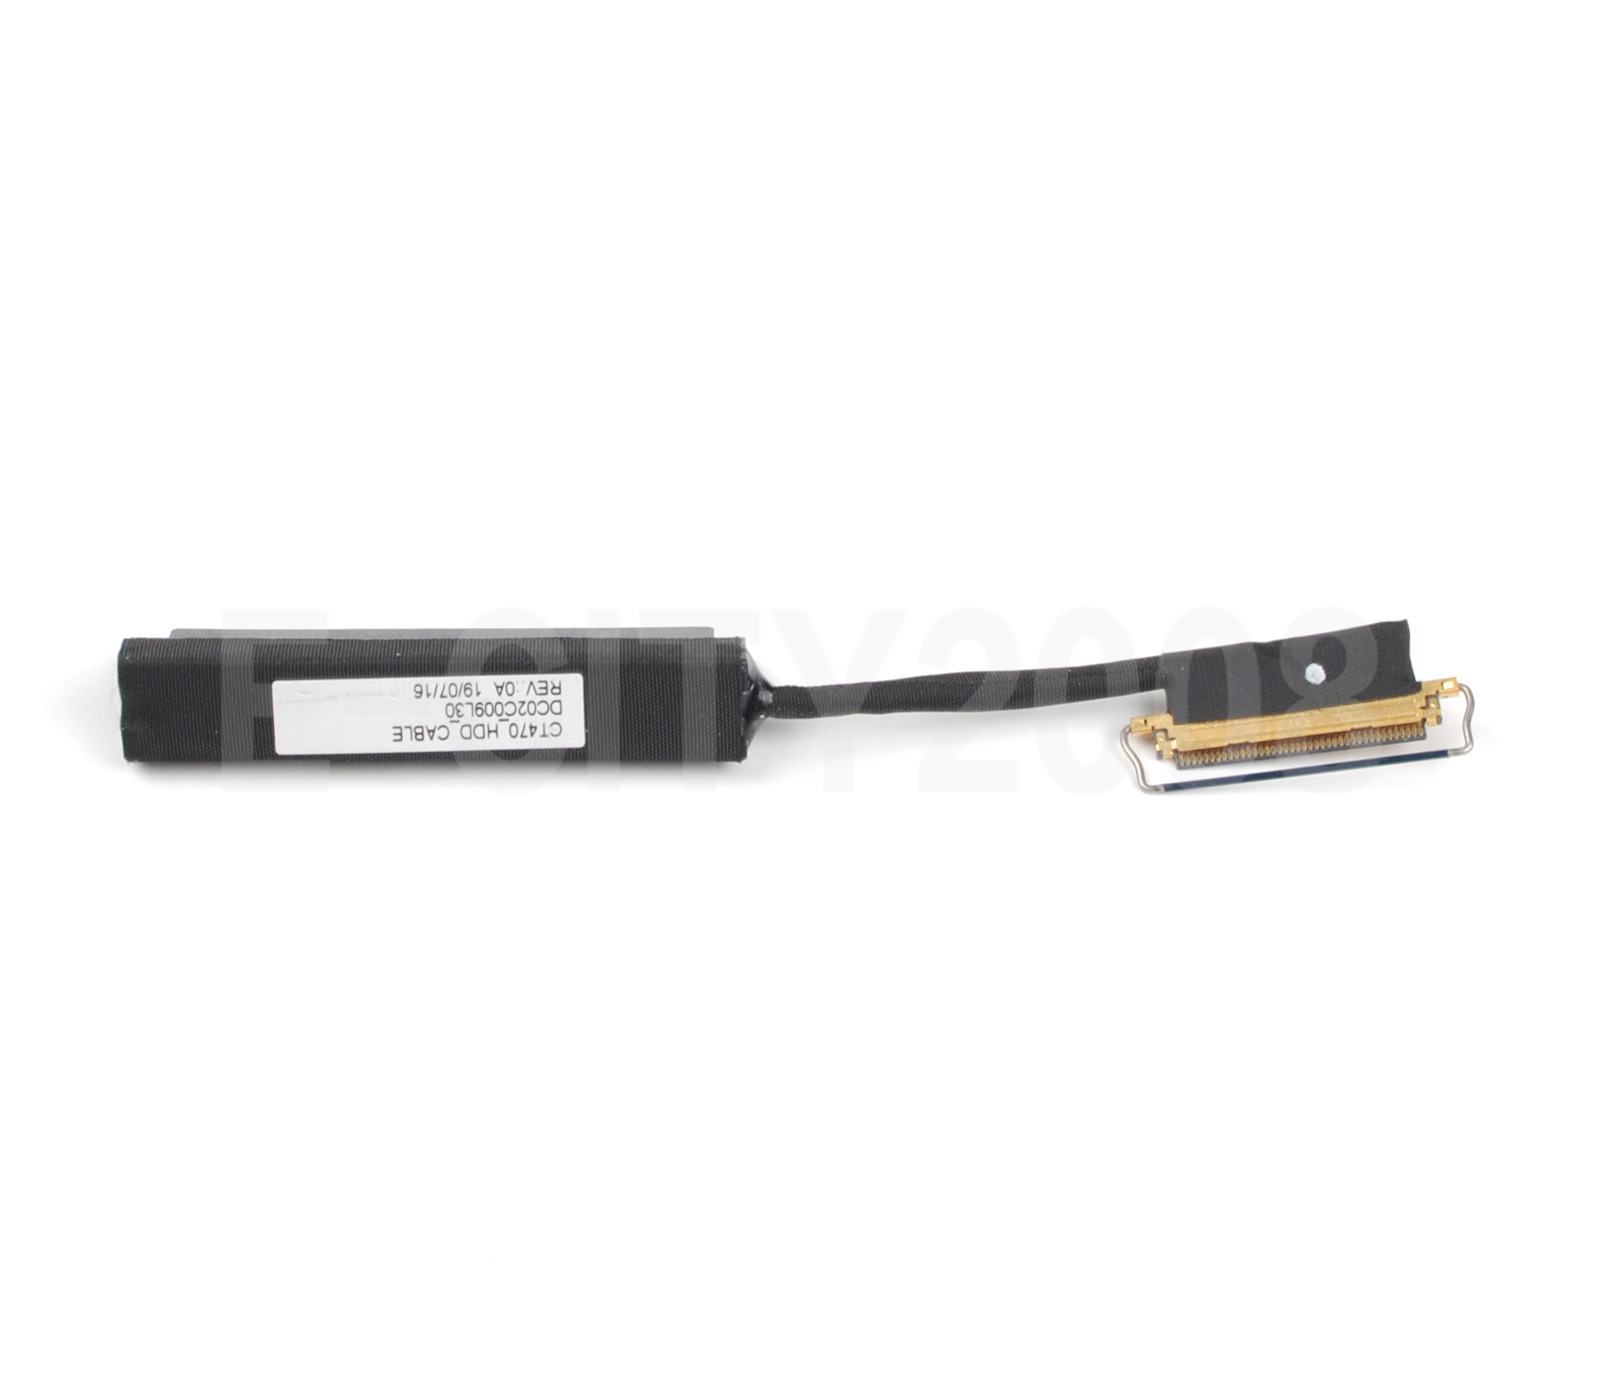 For Lenovo Thinkpad T470 Hdd Connector Sata Cable Dc02C009L30 Ct470 Hdd Cable - $17.99